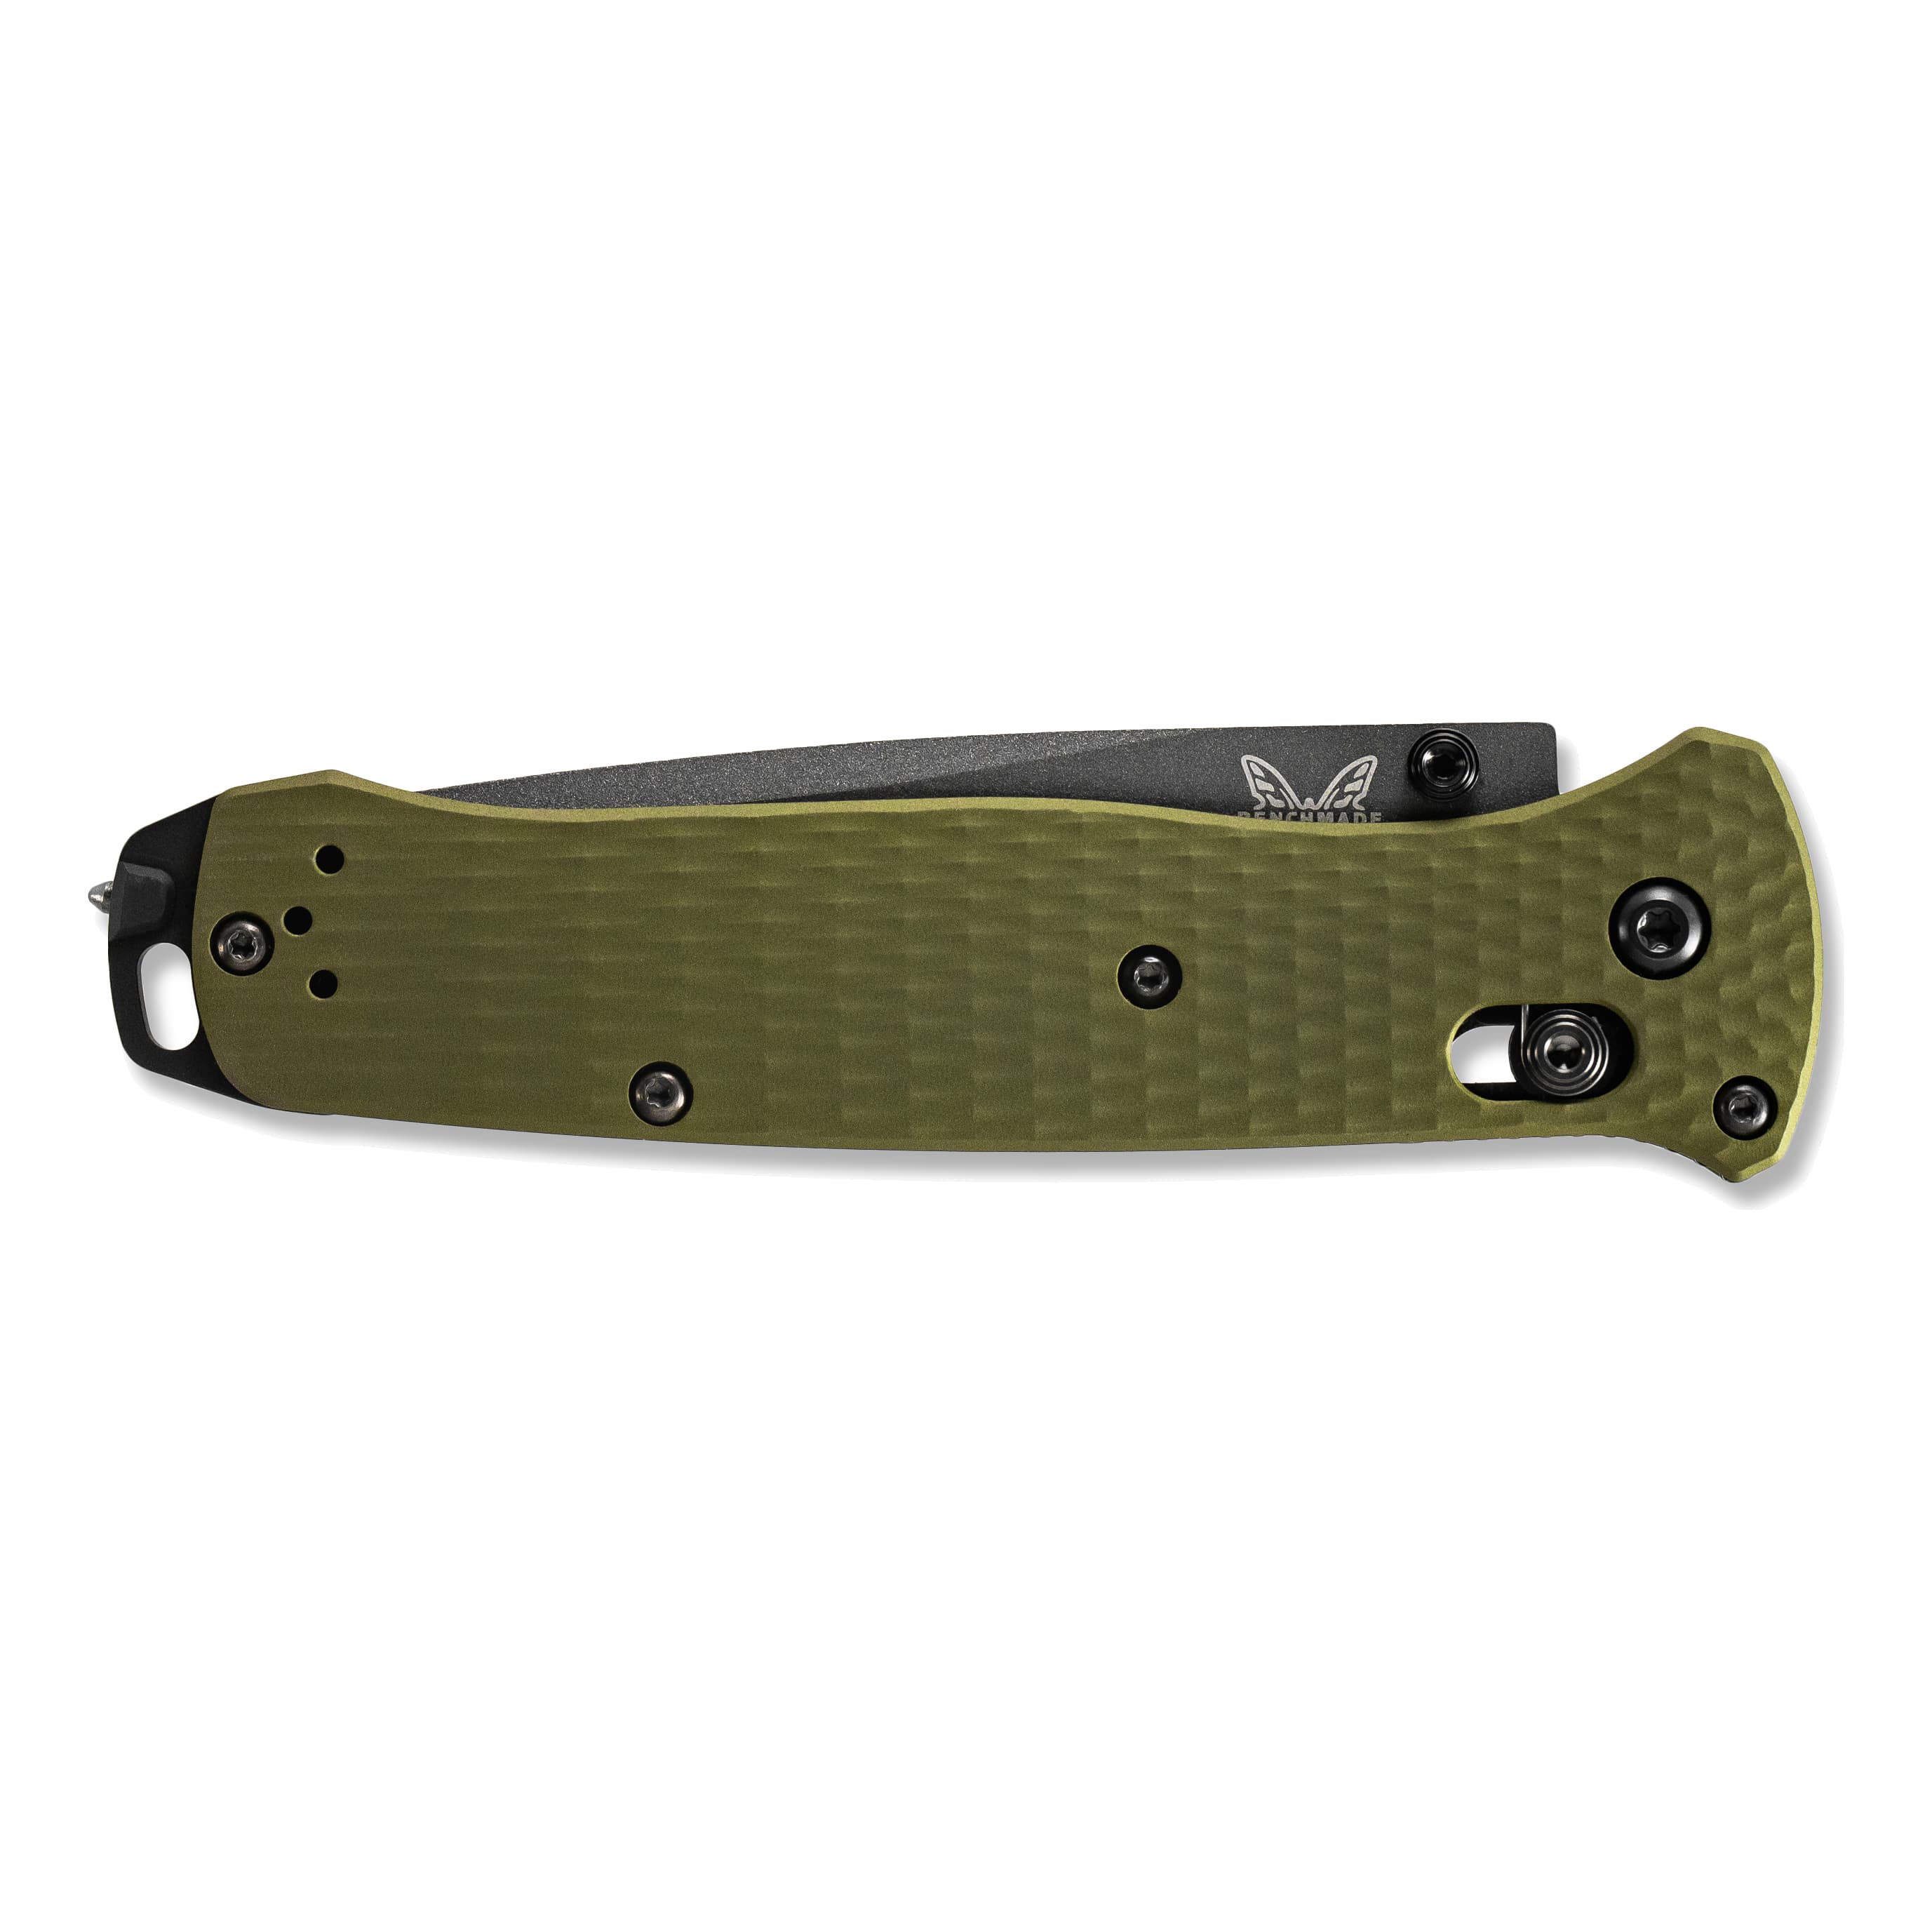 Benchmade® 537GY-1 Bailout Folding Knife - Closed View